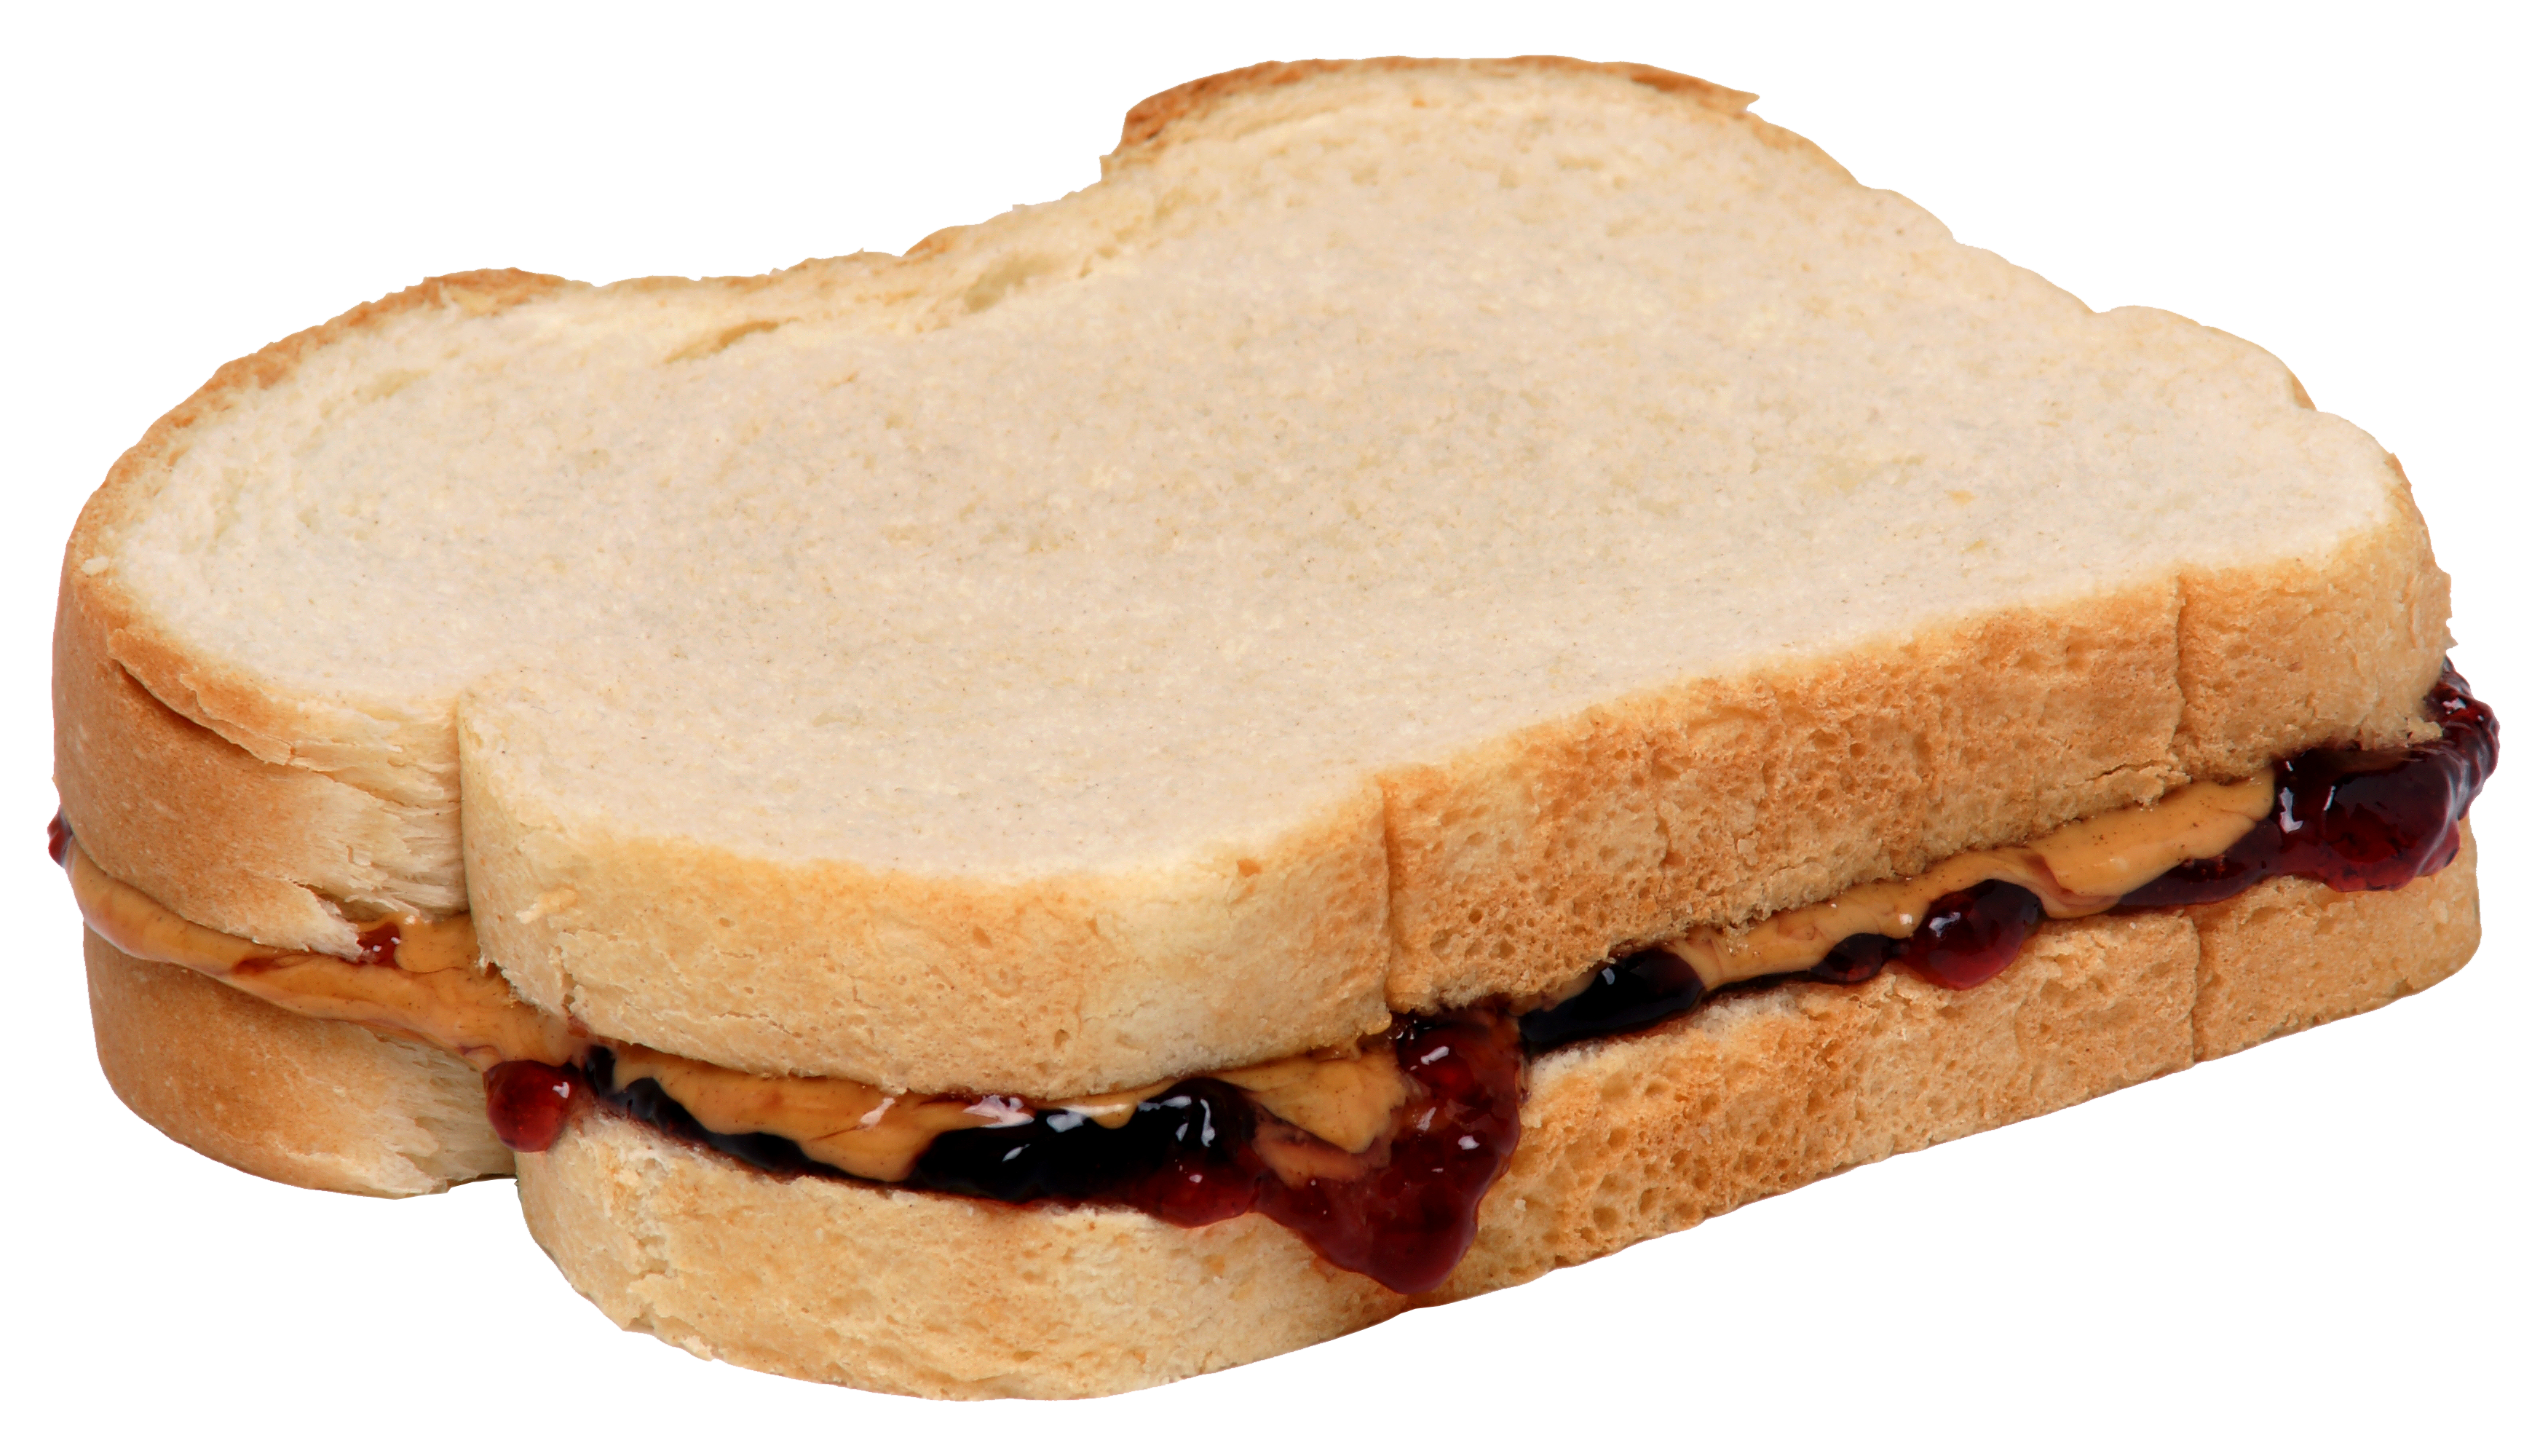 Peanut butter and jelly sandwich - Wikipedia, the free encyclopedia